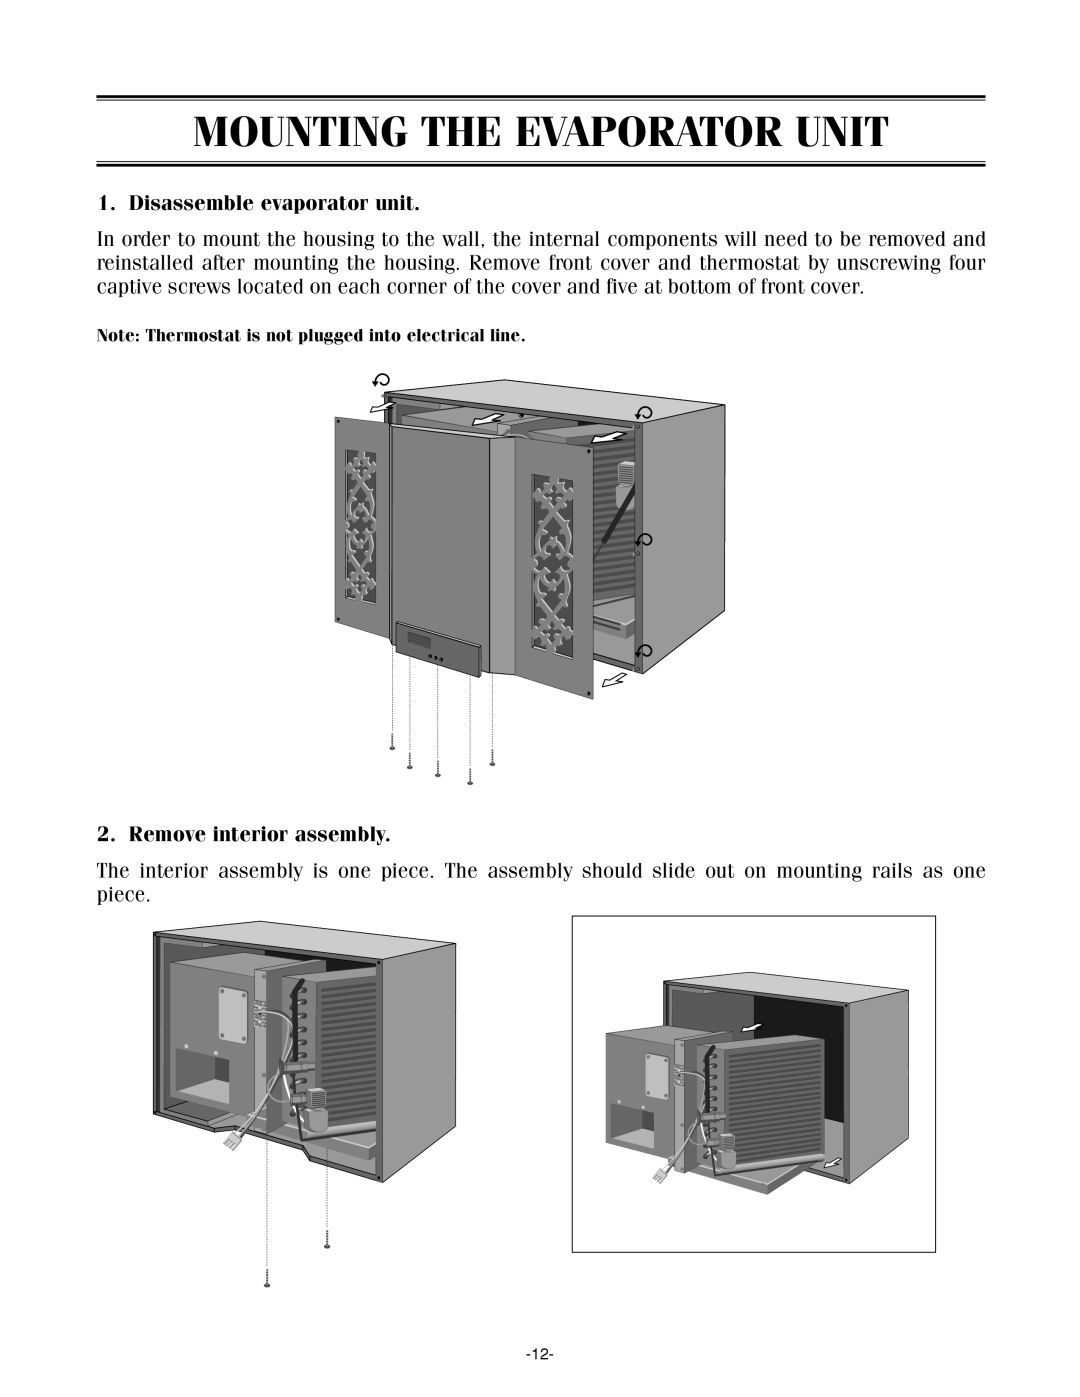 WhisperKool SS4000, SS7000 owner manual Mounting The Evaporator Unit, Disassemble evaporator unit, Remove interior assembly 